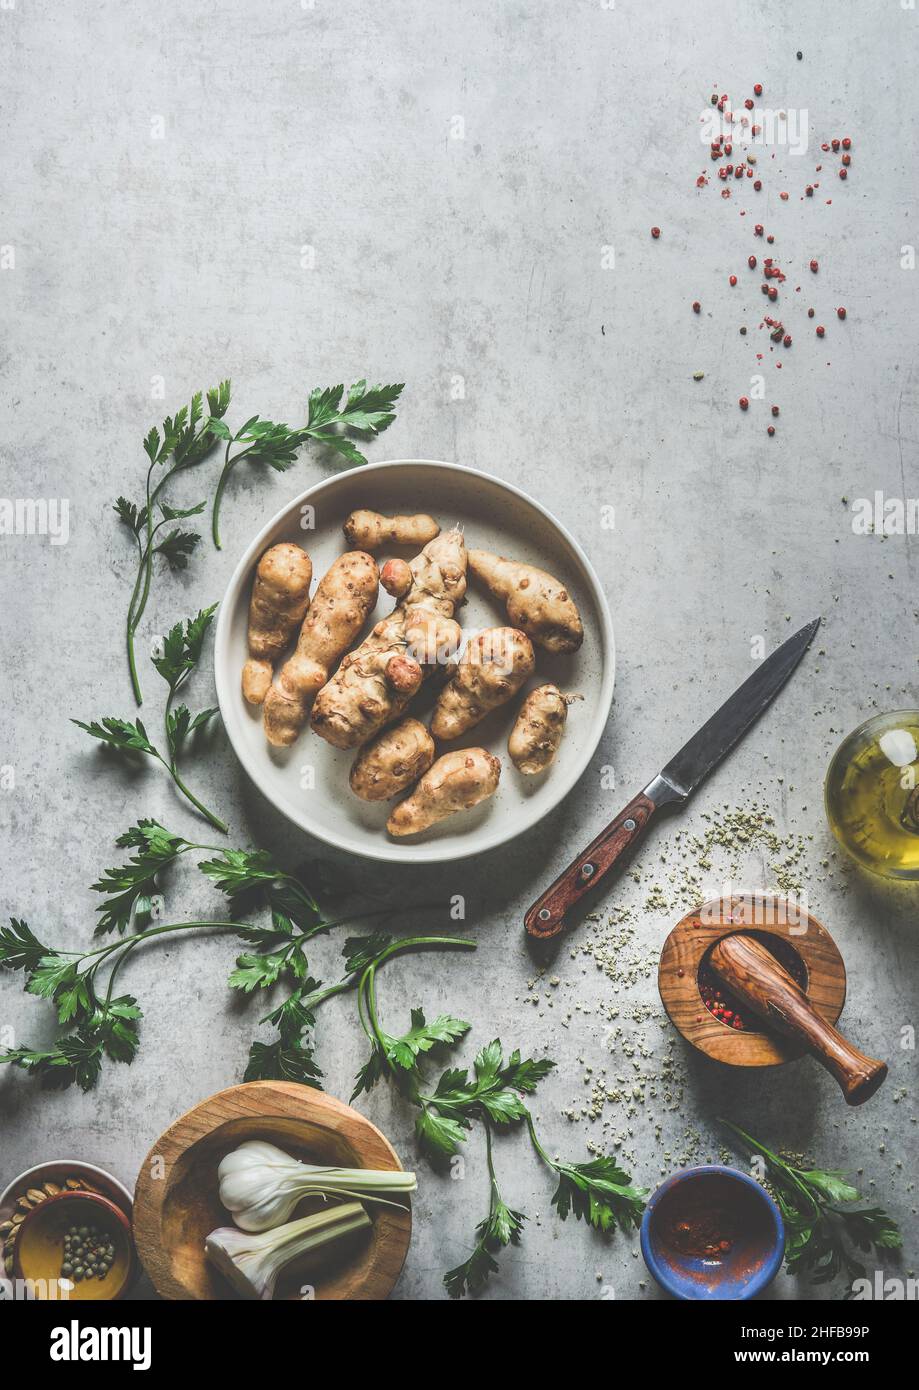 Jerusalem artichoke in bowl on grey concrete kitchen table with ingredients, parsley, mortar and pestle, kitchen knife, oil and garlic. Preparing vege Stock Photo